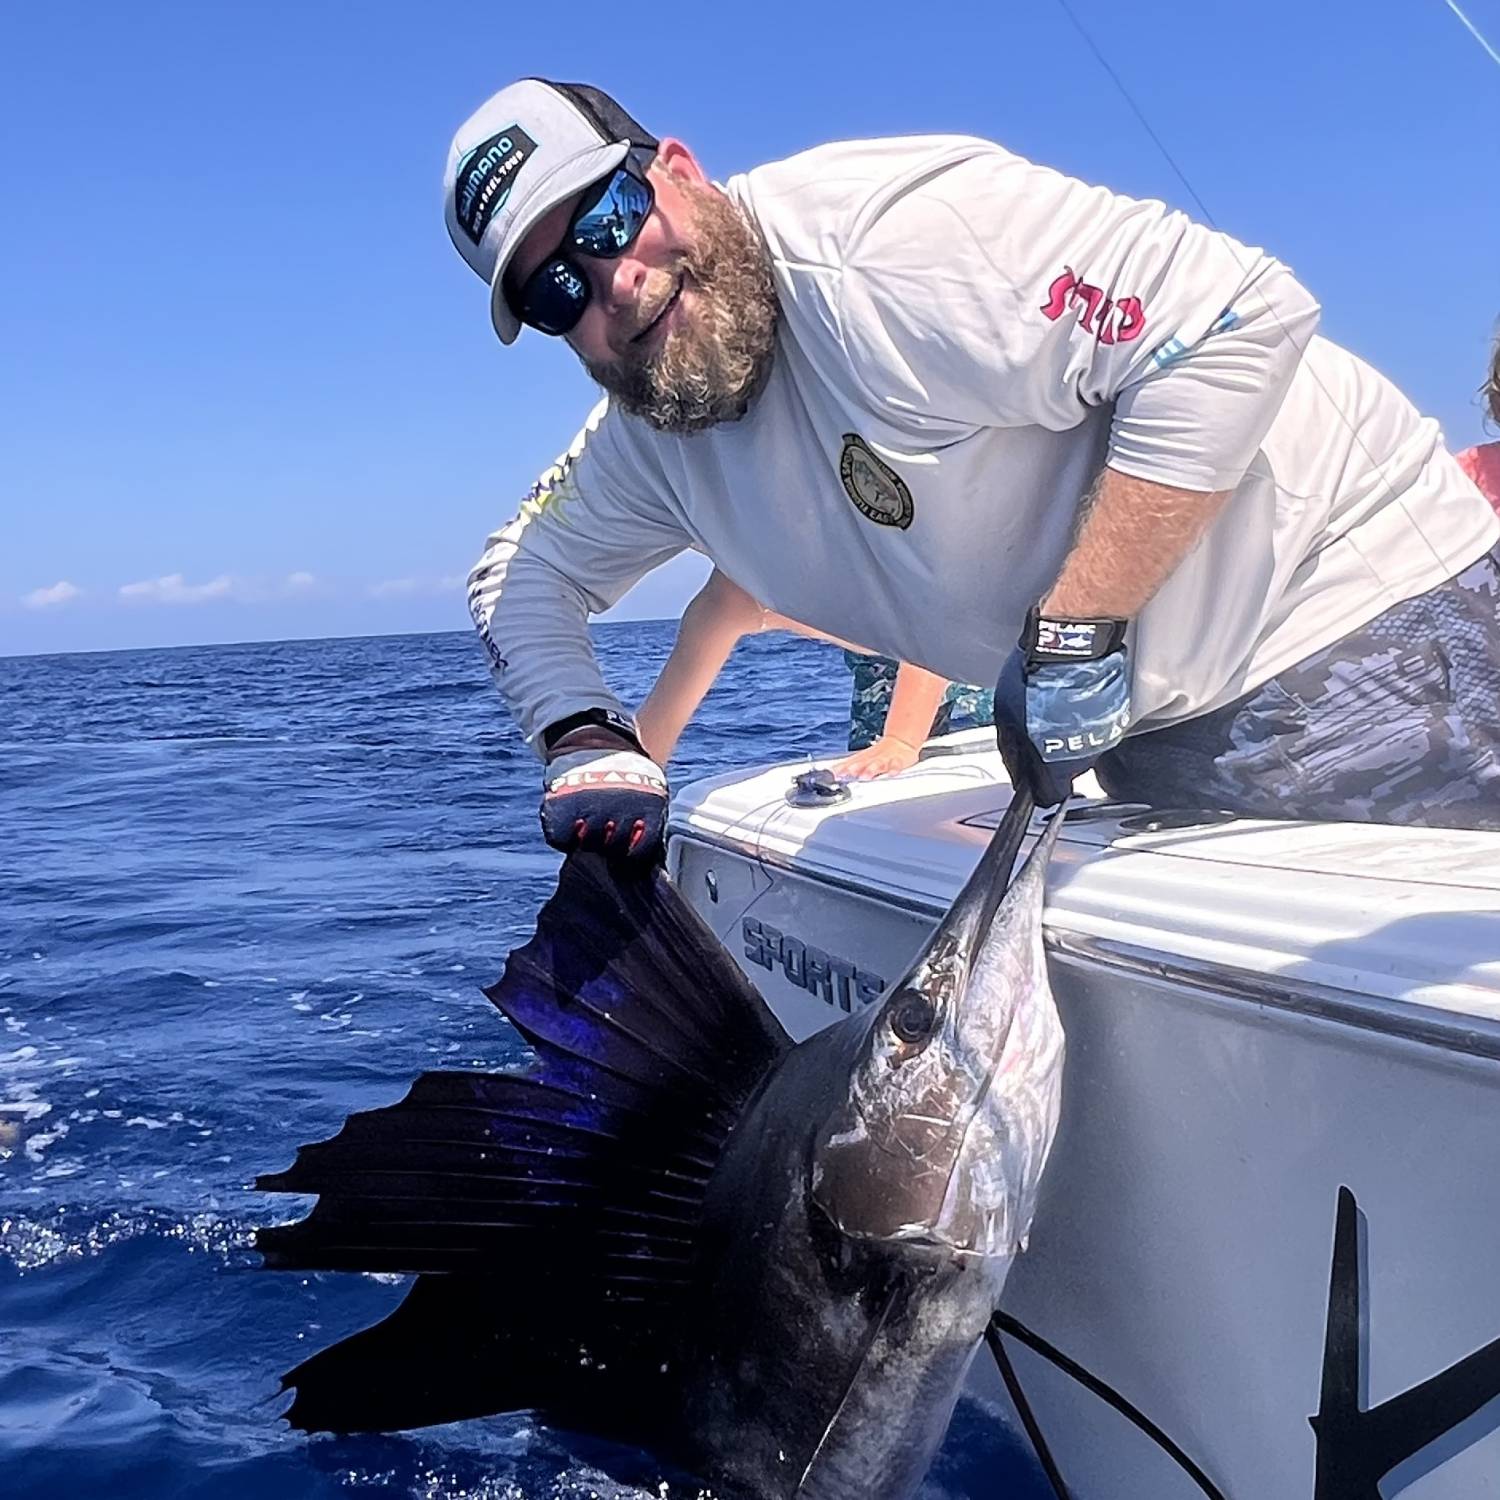 Title: Sailfish catching fool - On board their Sportsman Open 232 Center Console - Location: Sebastian Inlet Florida. Participating in the Photo Contest #SportsmanJune2024